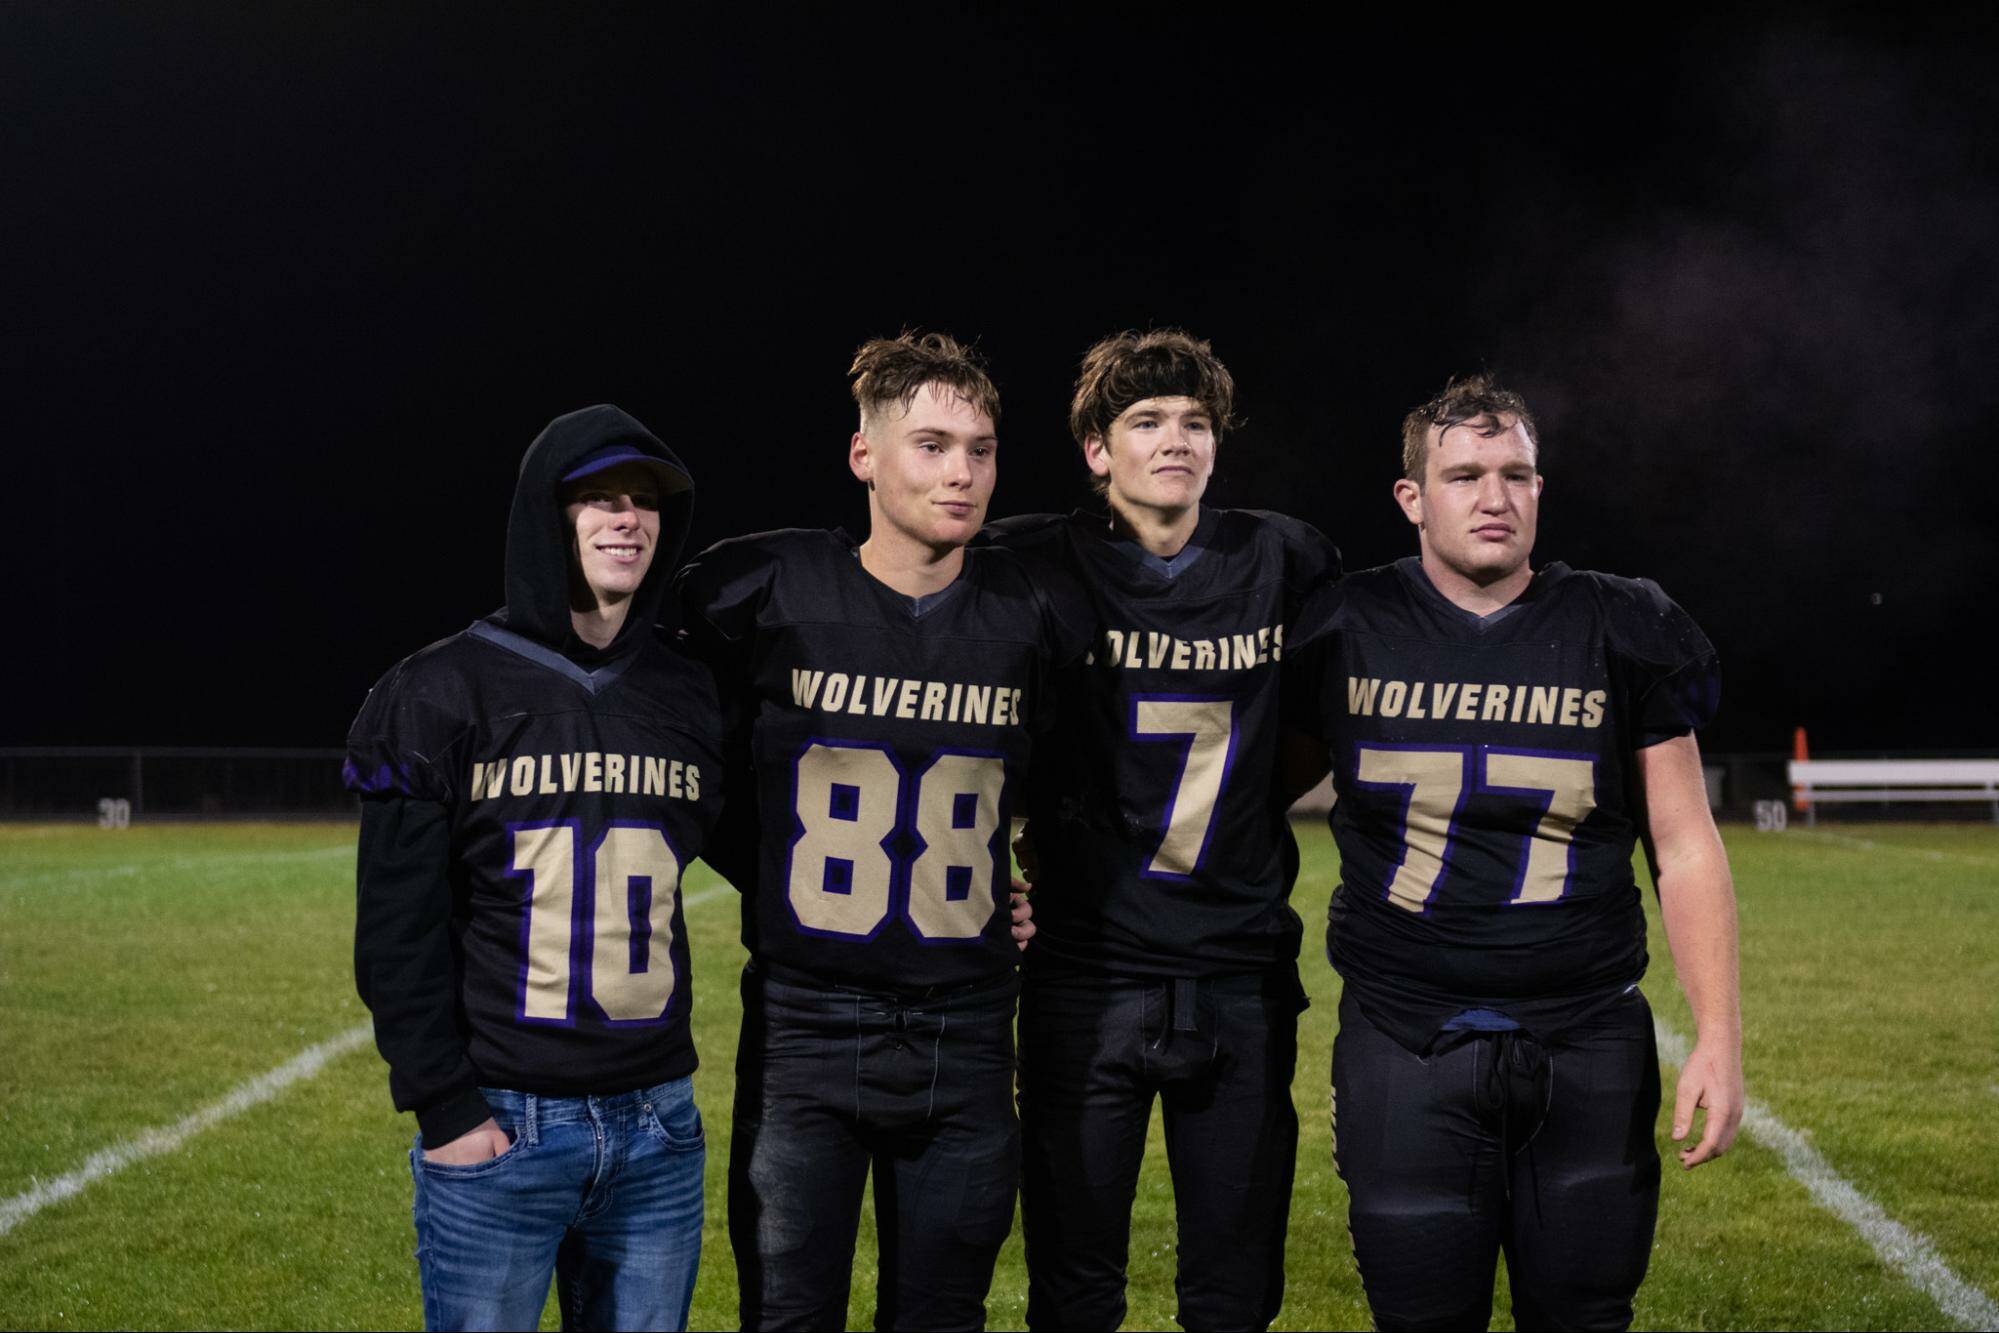 Contributed photo by Kathryn Wheeler
The Wolverines four seniors